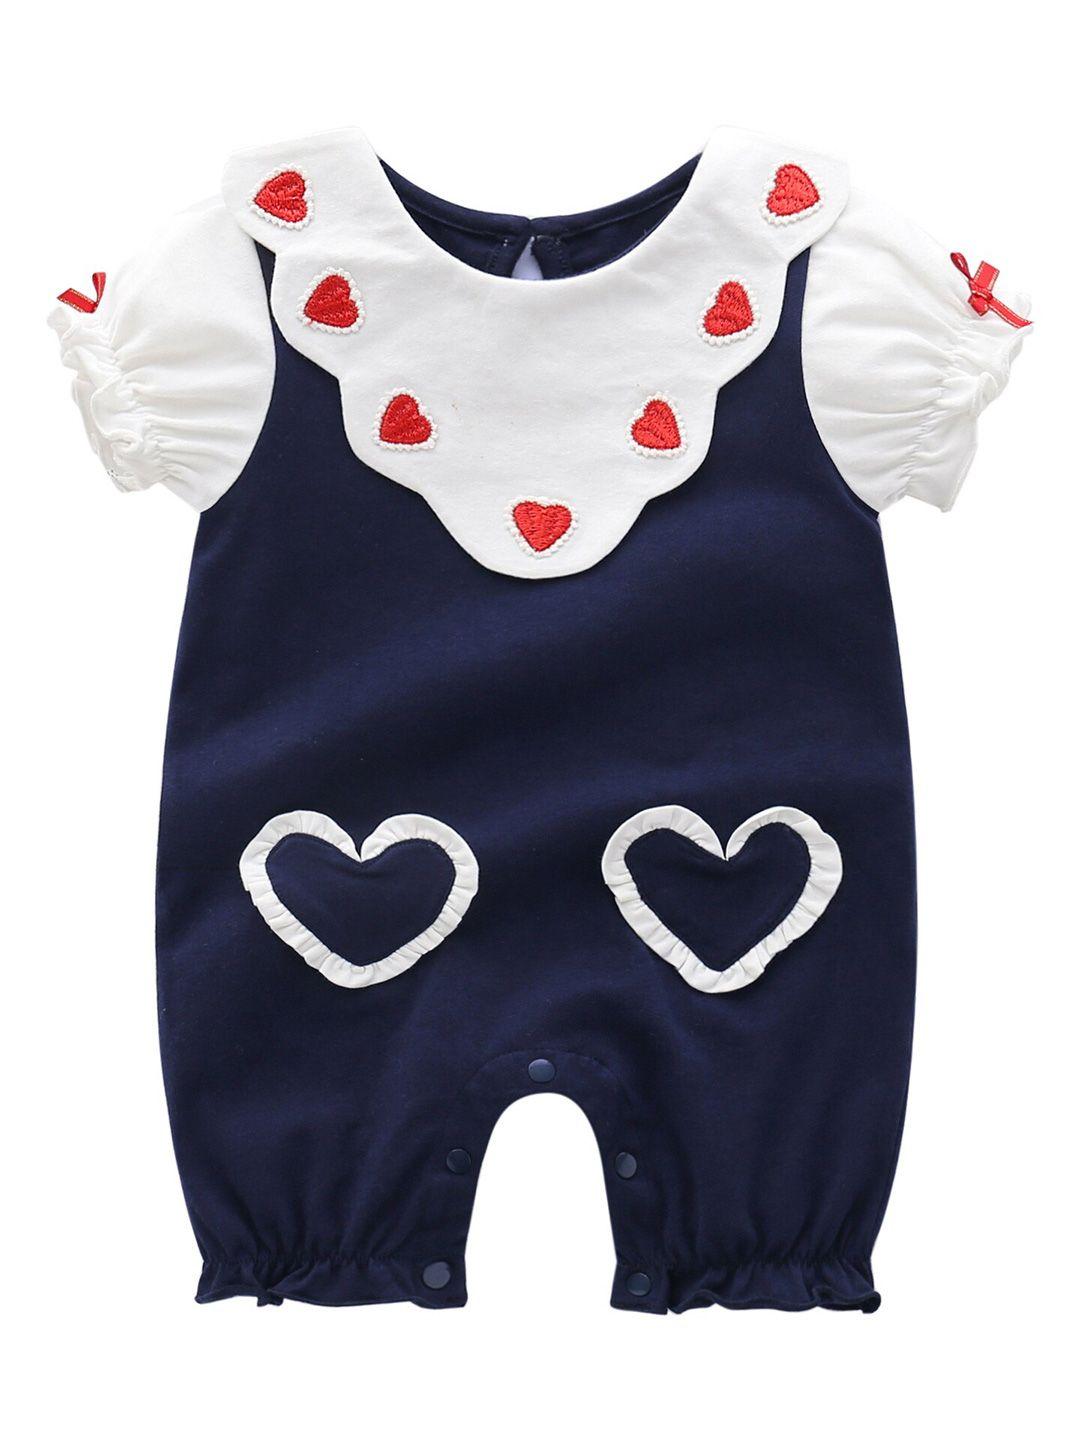 stylecast-infant-girls-navy-blue-graphic-printed-pure-cotton-romper